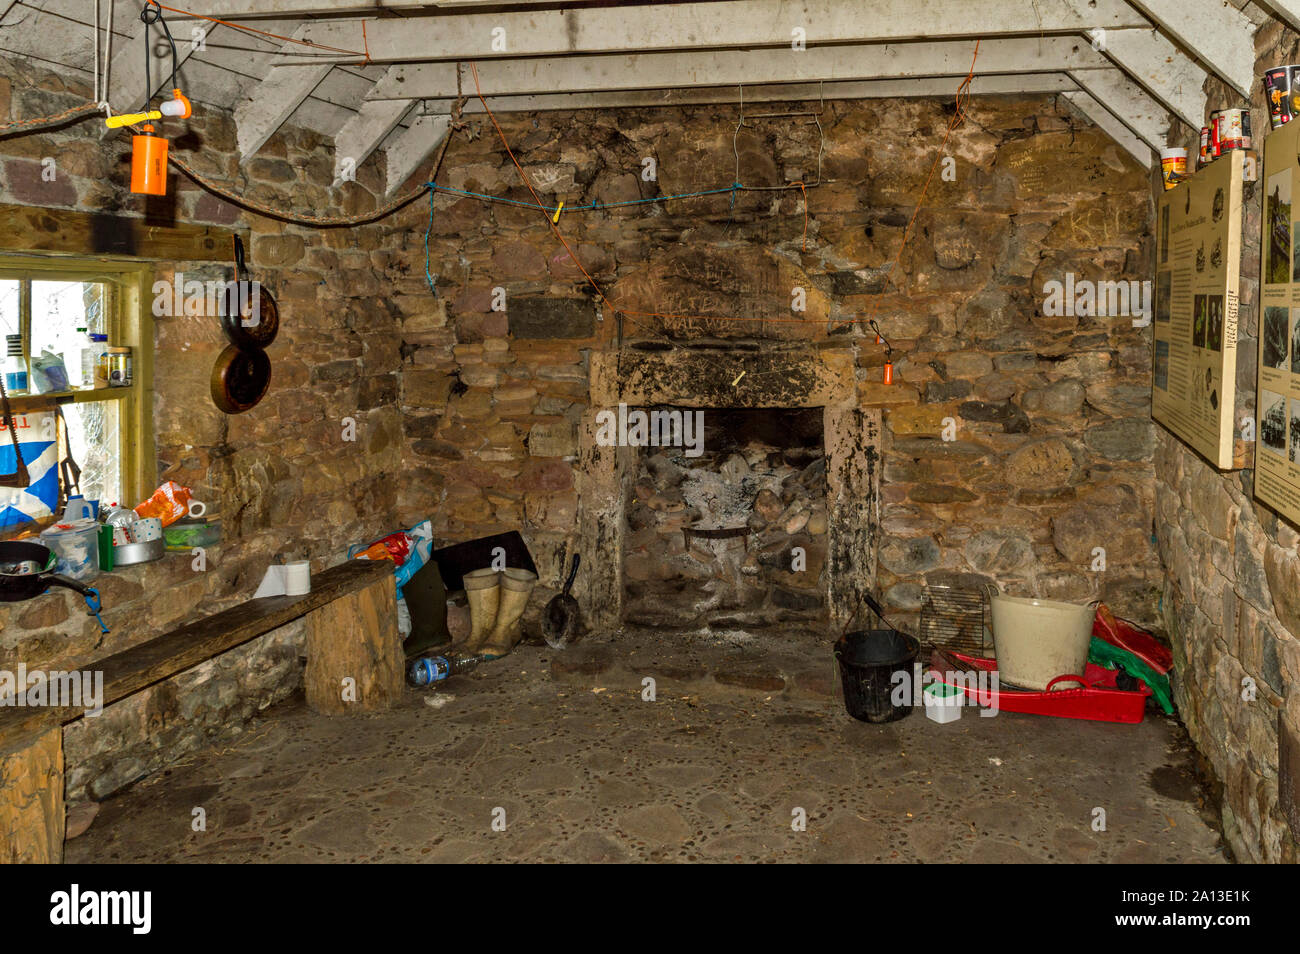 ROSEMARKIE TO CROMARTY WALK BLACK ISLE SCOTLAND INTERIOR OLD STONE BOTHY WHICH CONTAINS INTERPRETATIVE BOARDS ON SALMON FISHING AND HUGH MILLER Stock Photo